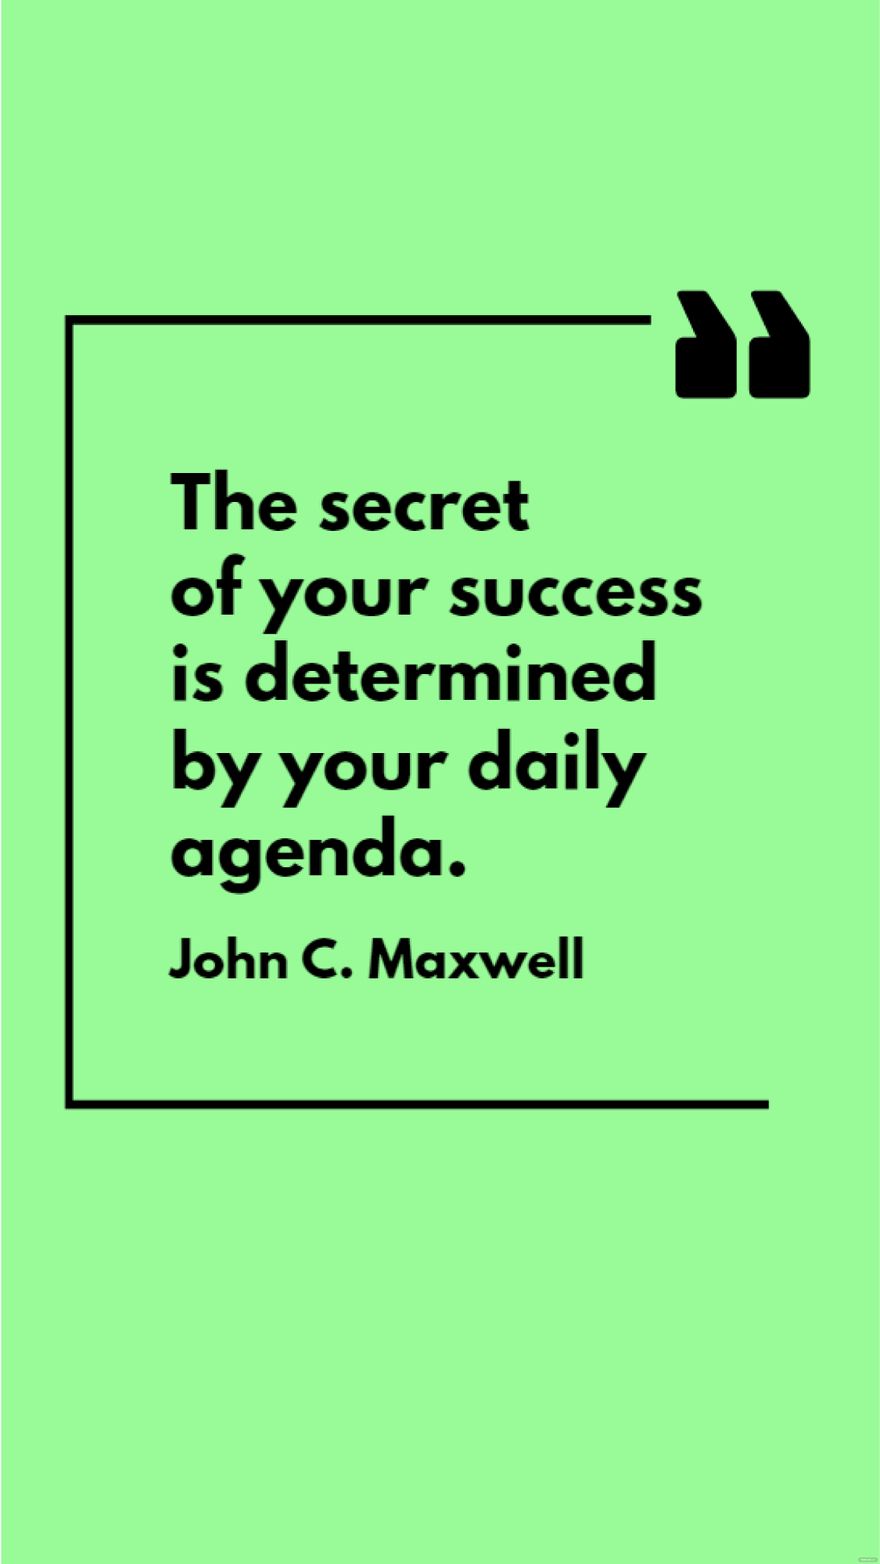 Free John C. Maxwell - The secret of your success is determined by your daily agenda.